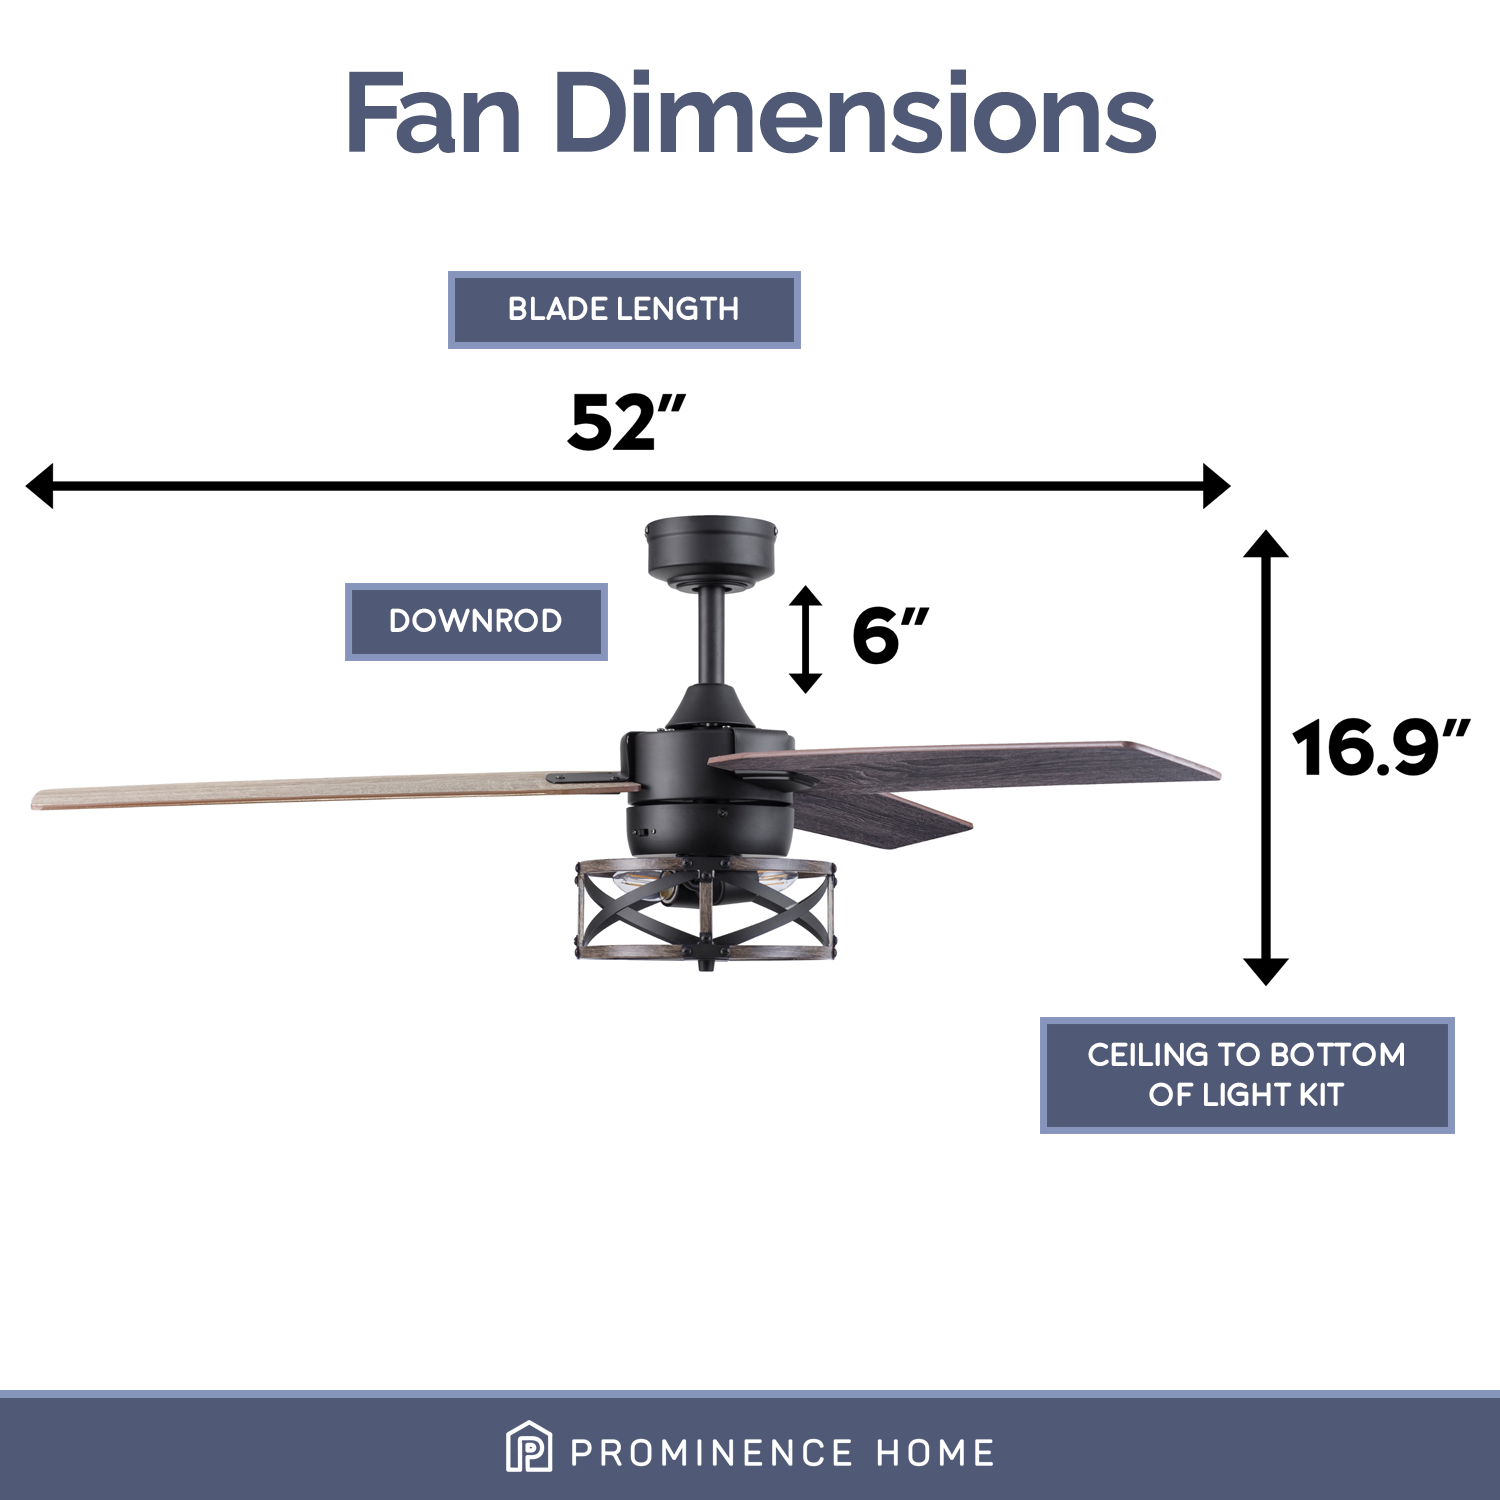 52 Inch Thedas, Matte Black, Remote Control, Ceiling Fan by Prominence Home